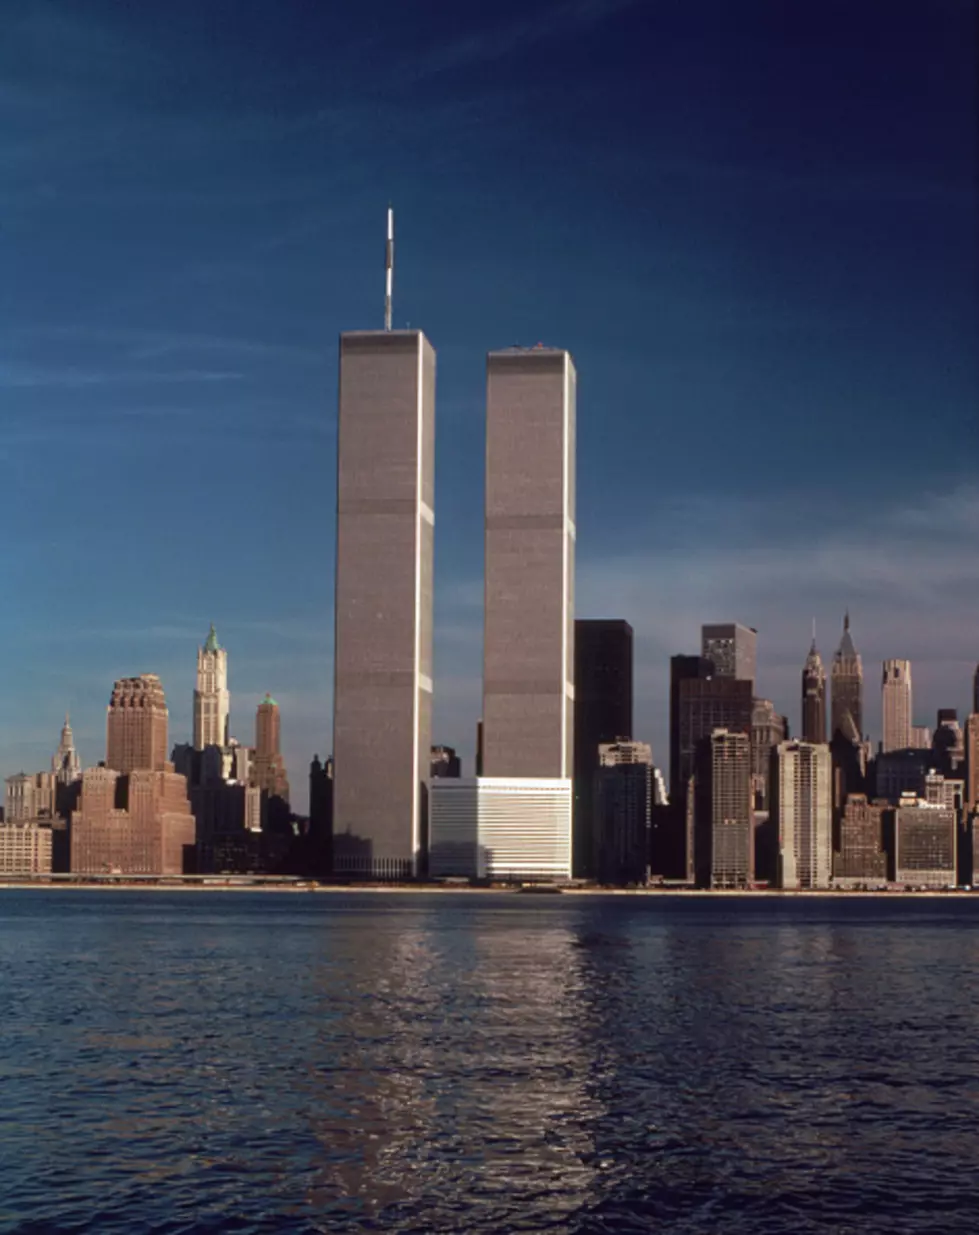 September 11th 2001, Remembering and Never Forgetting